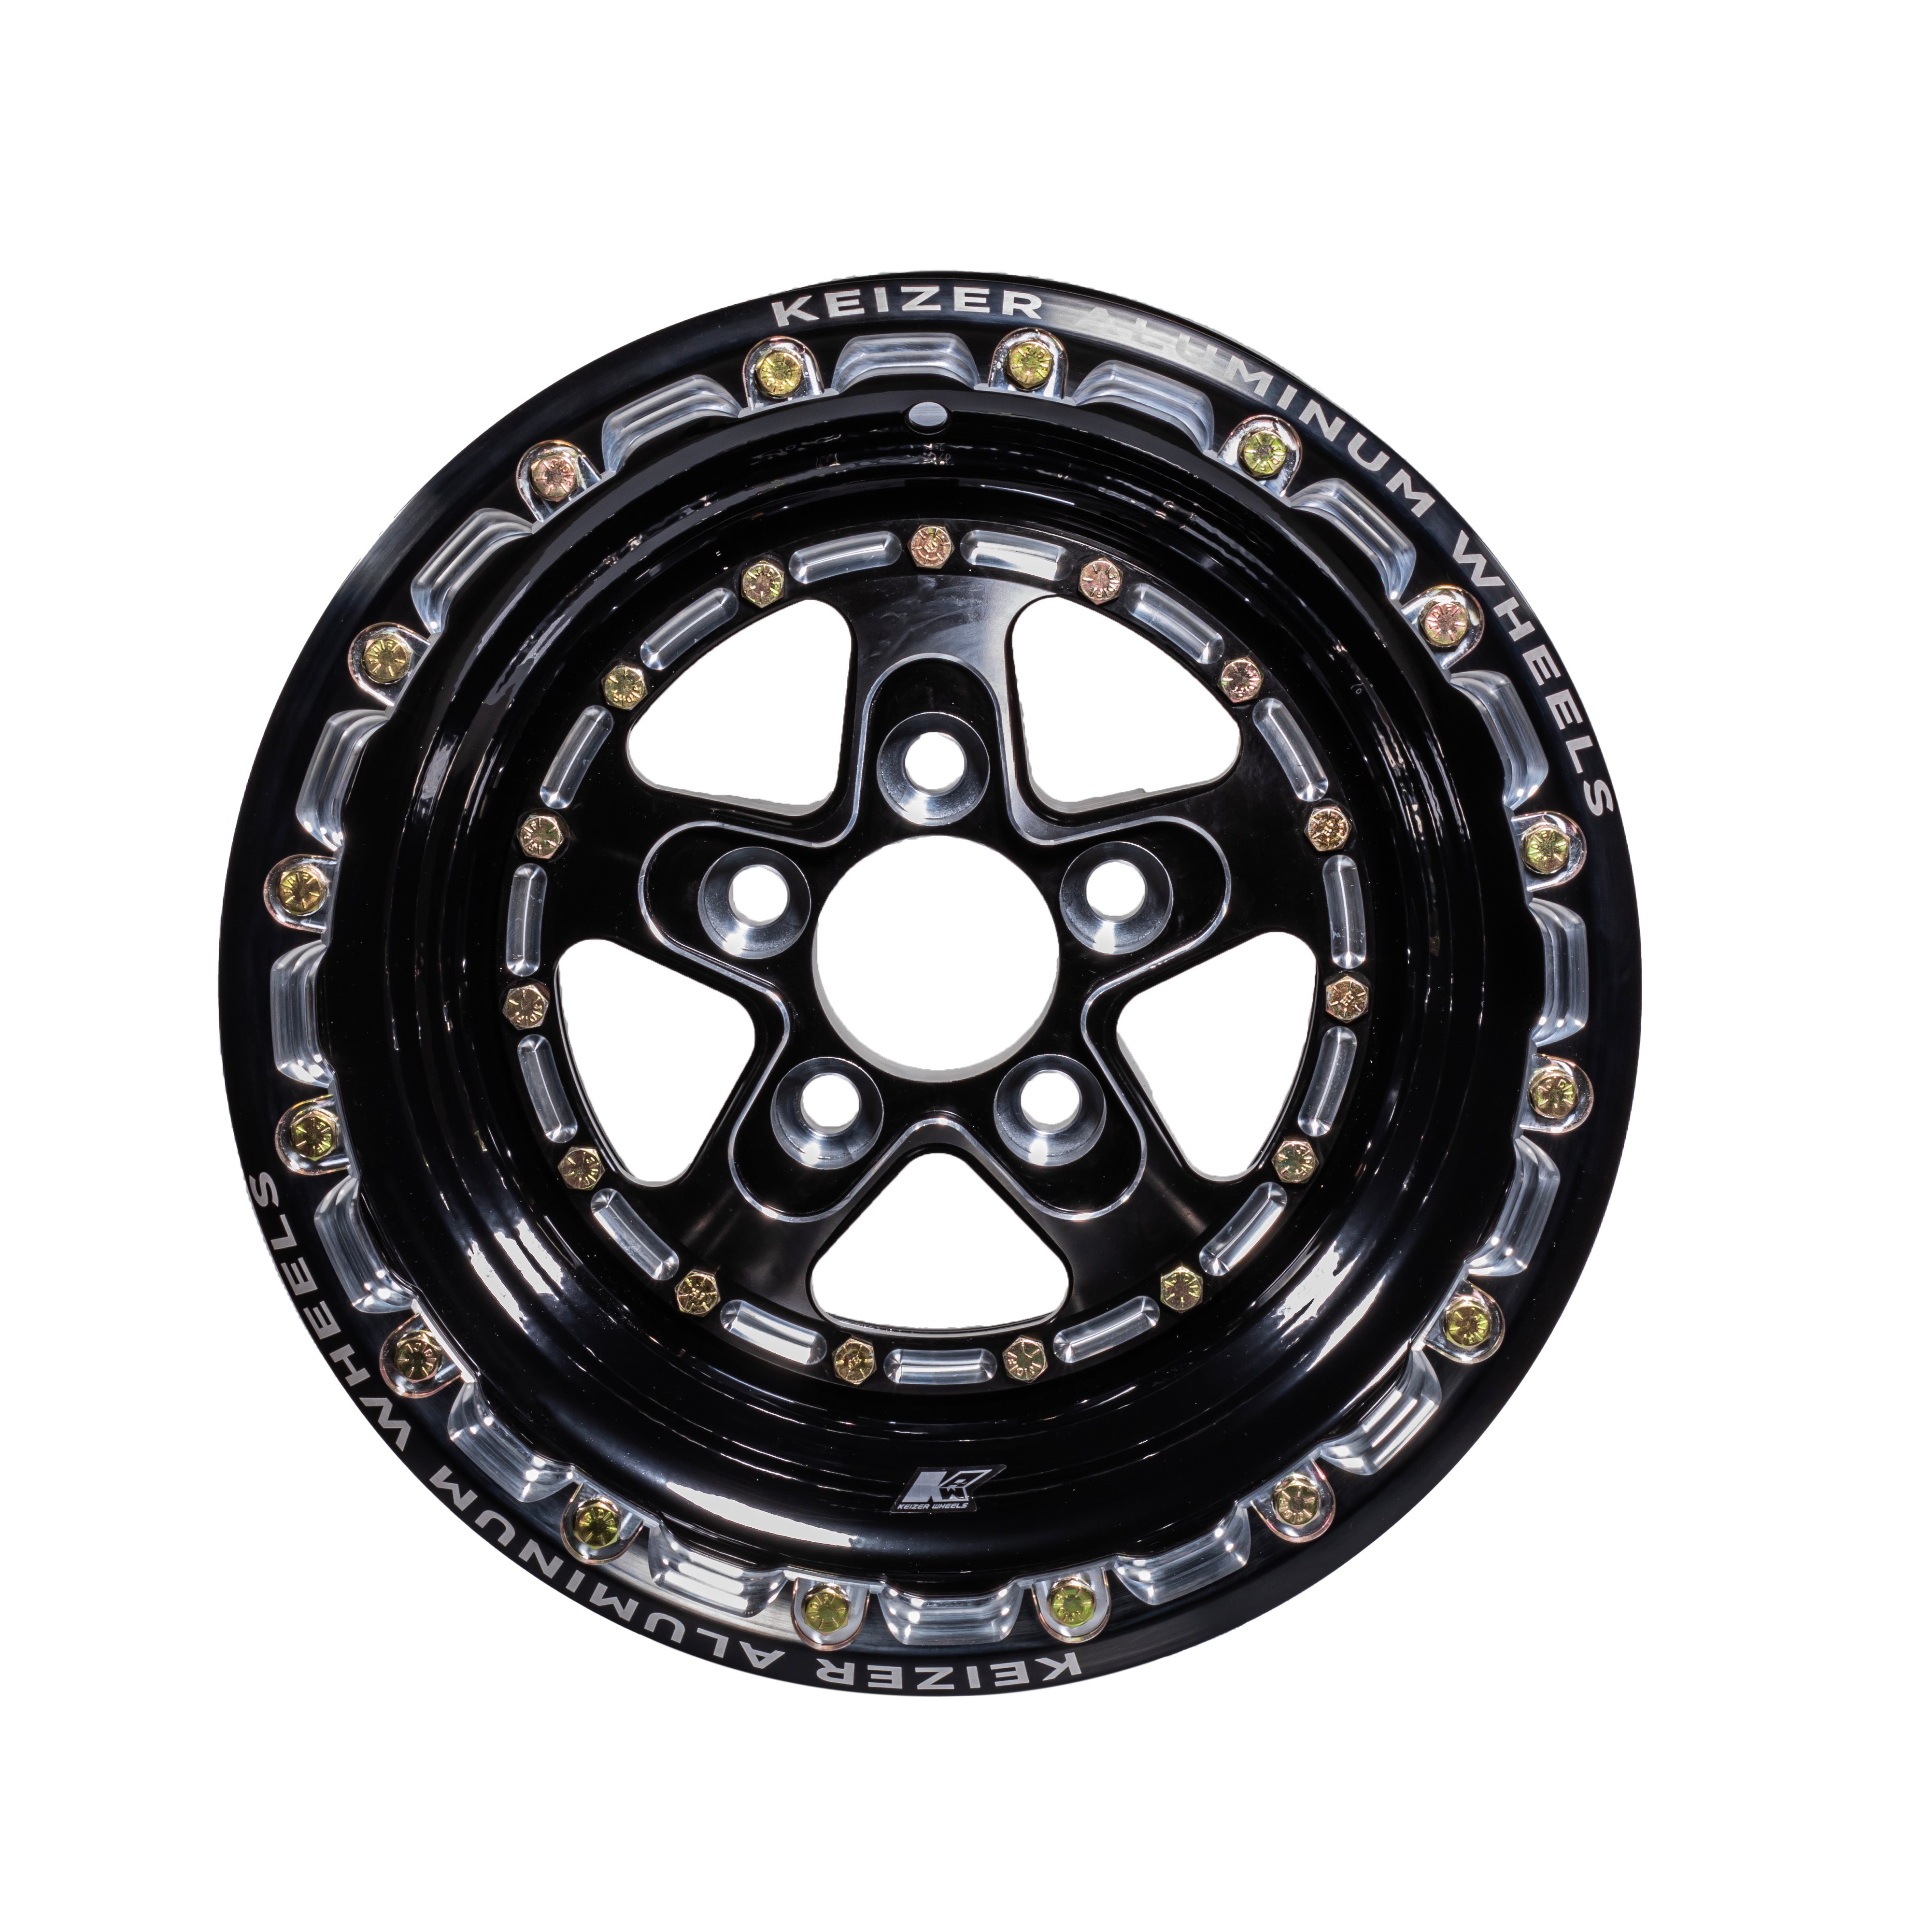 KEIZER FULL HOUSE FORGED WHEEL Raceparts - (REAR) Synergy